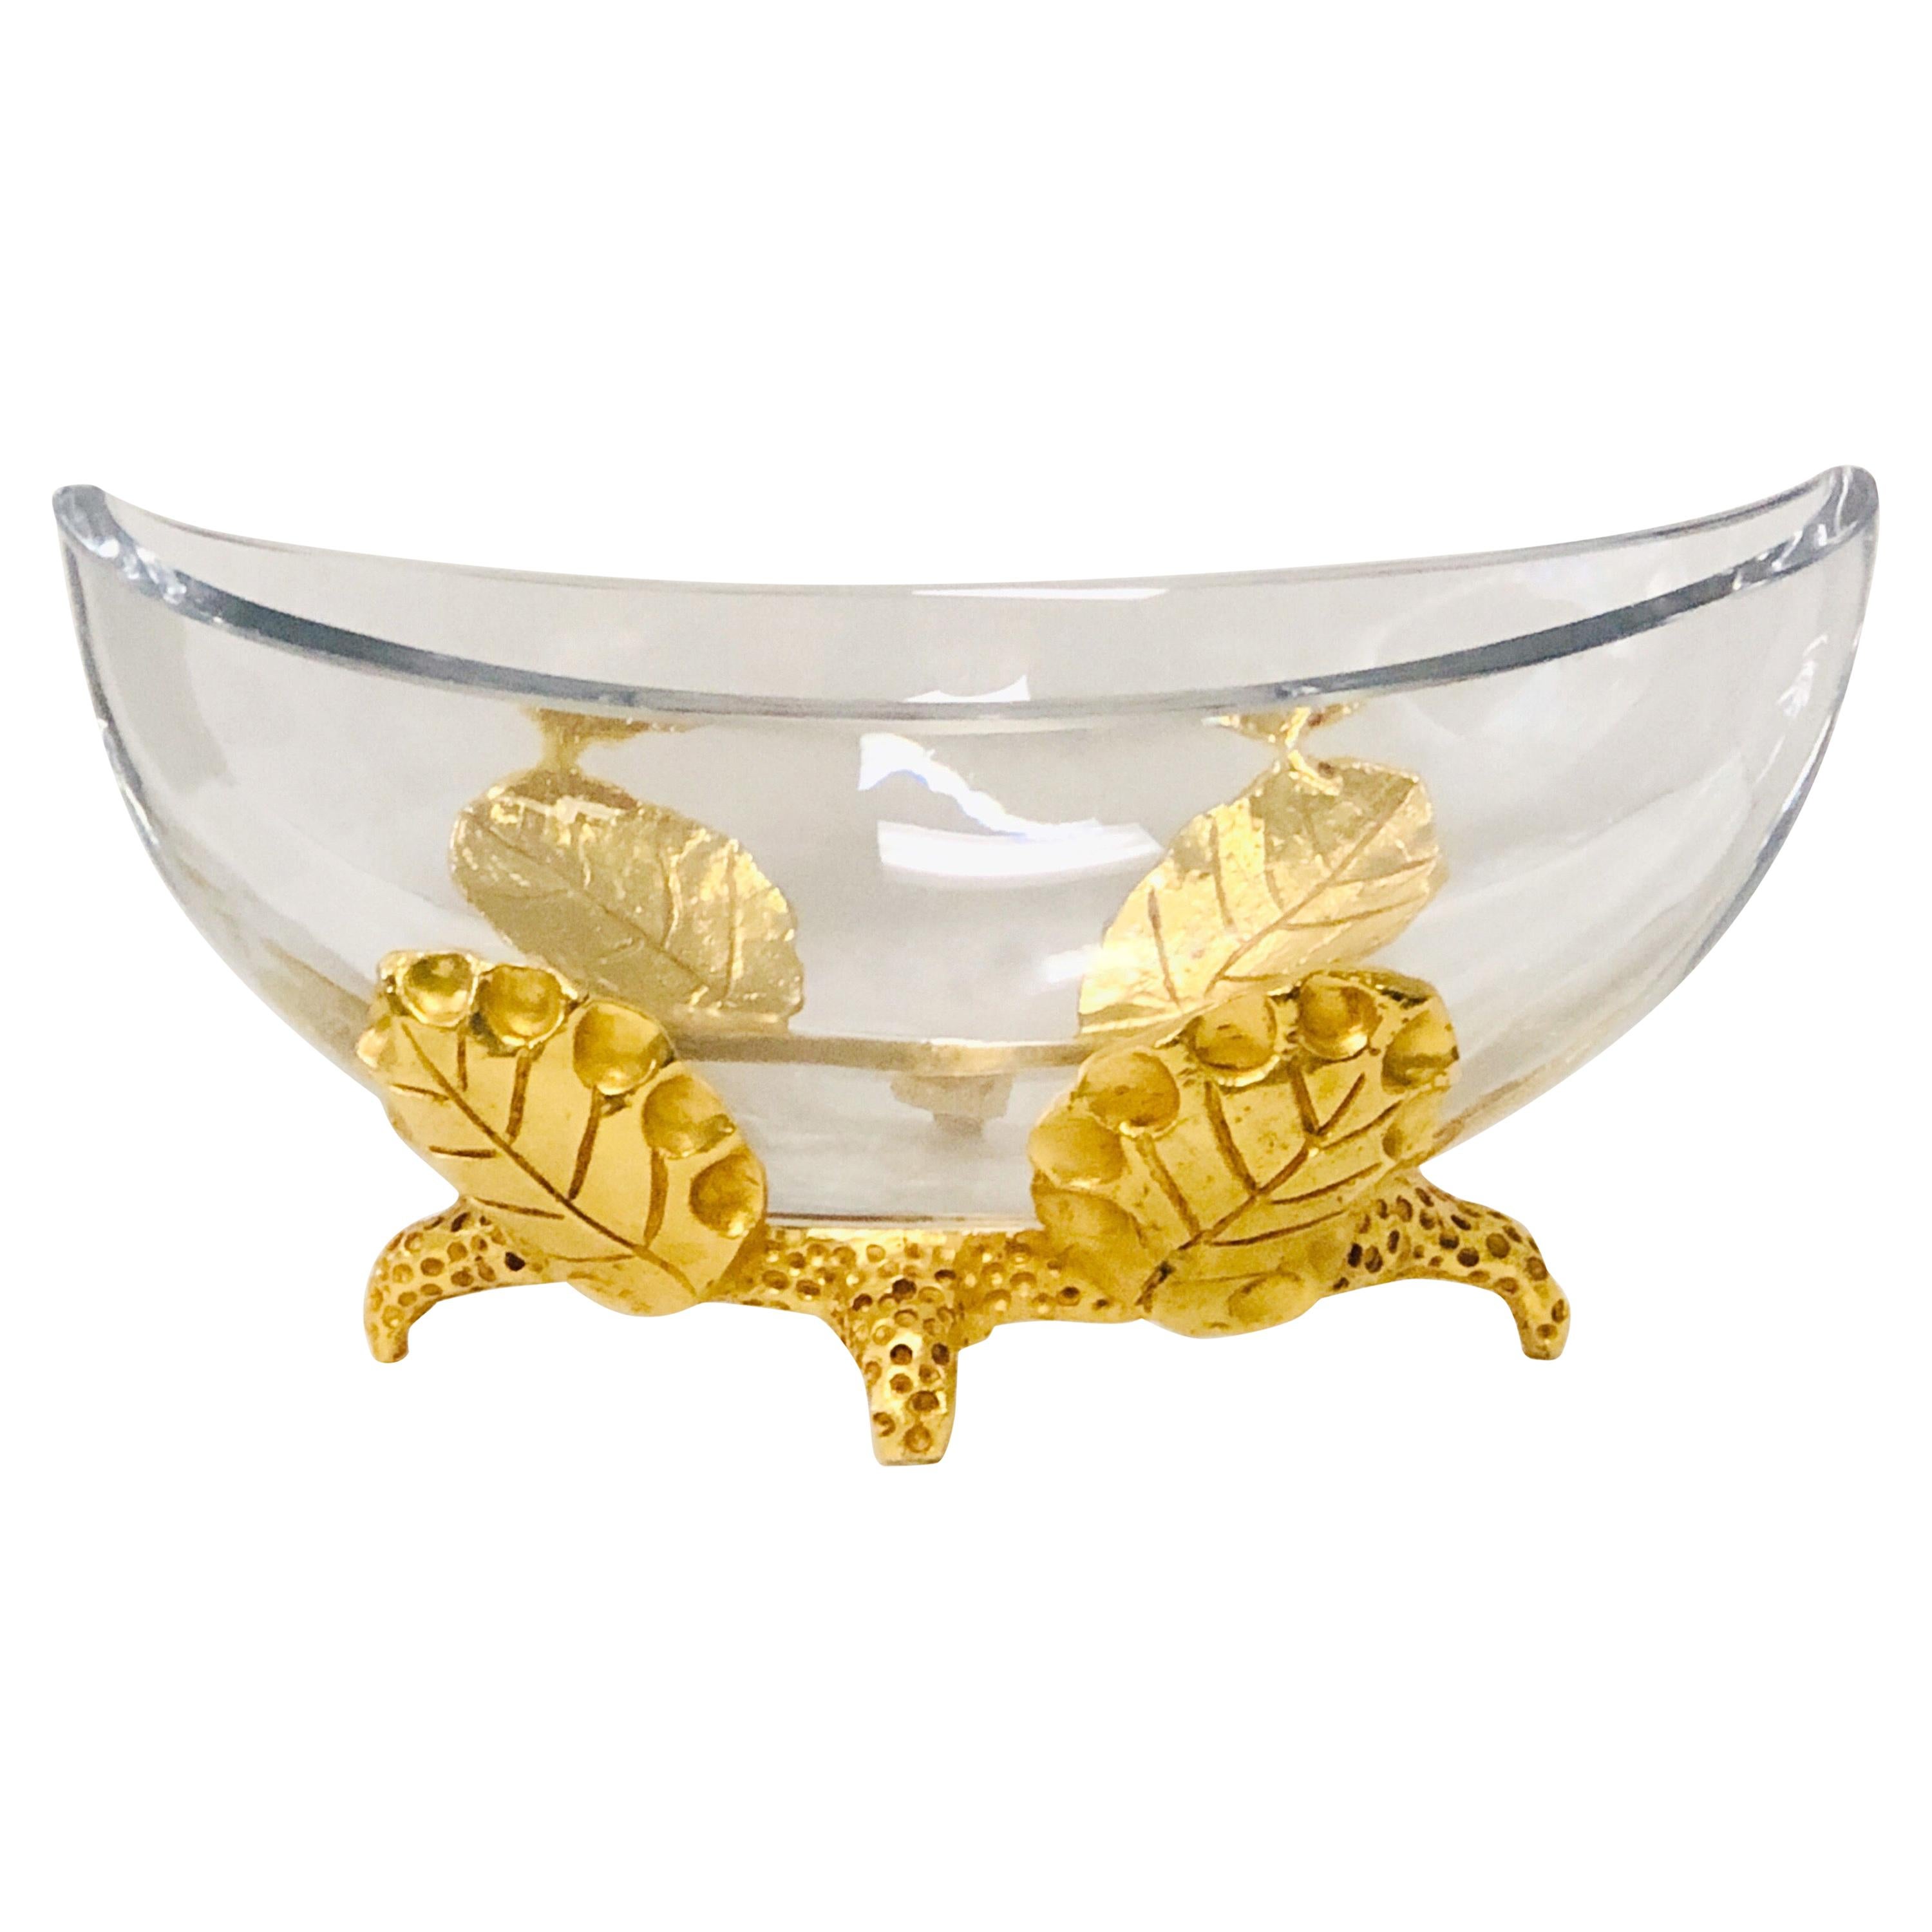 Fondica Bronze and Crystal Large  Bowl Centerpiece by Mathias For Sale